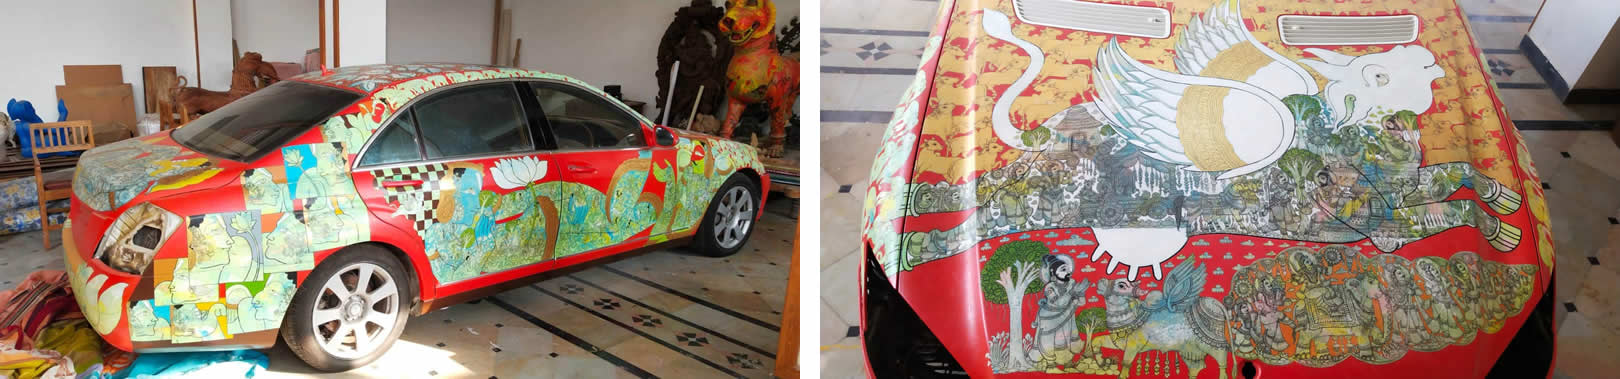 Ramesh was recently commissioned to paint this car in his style